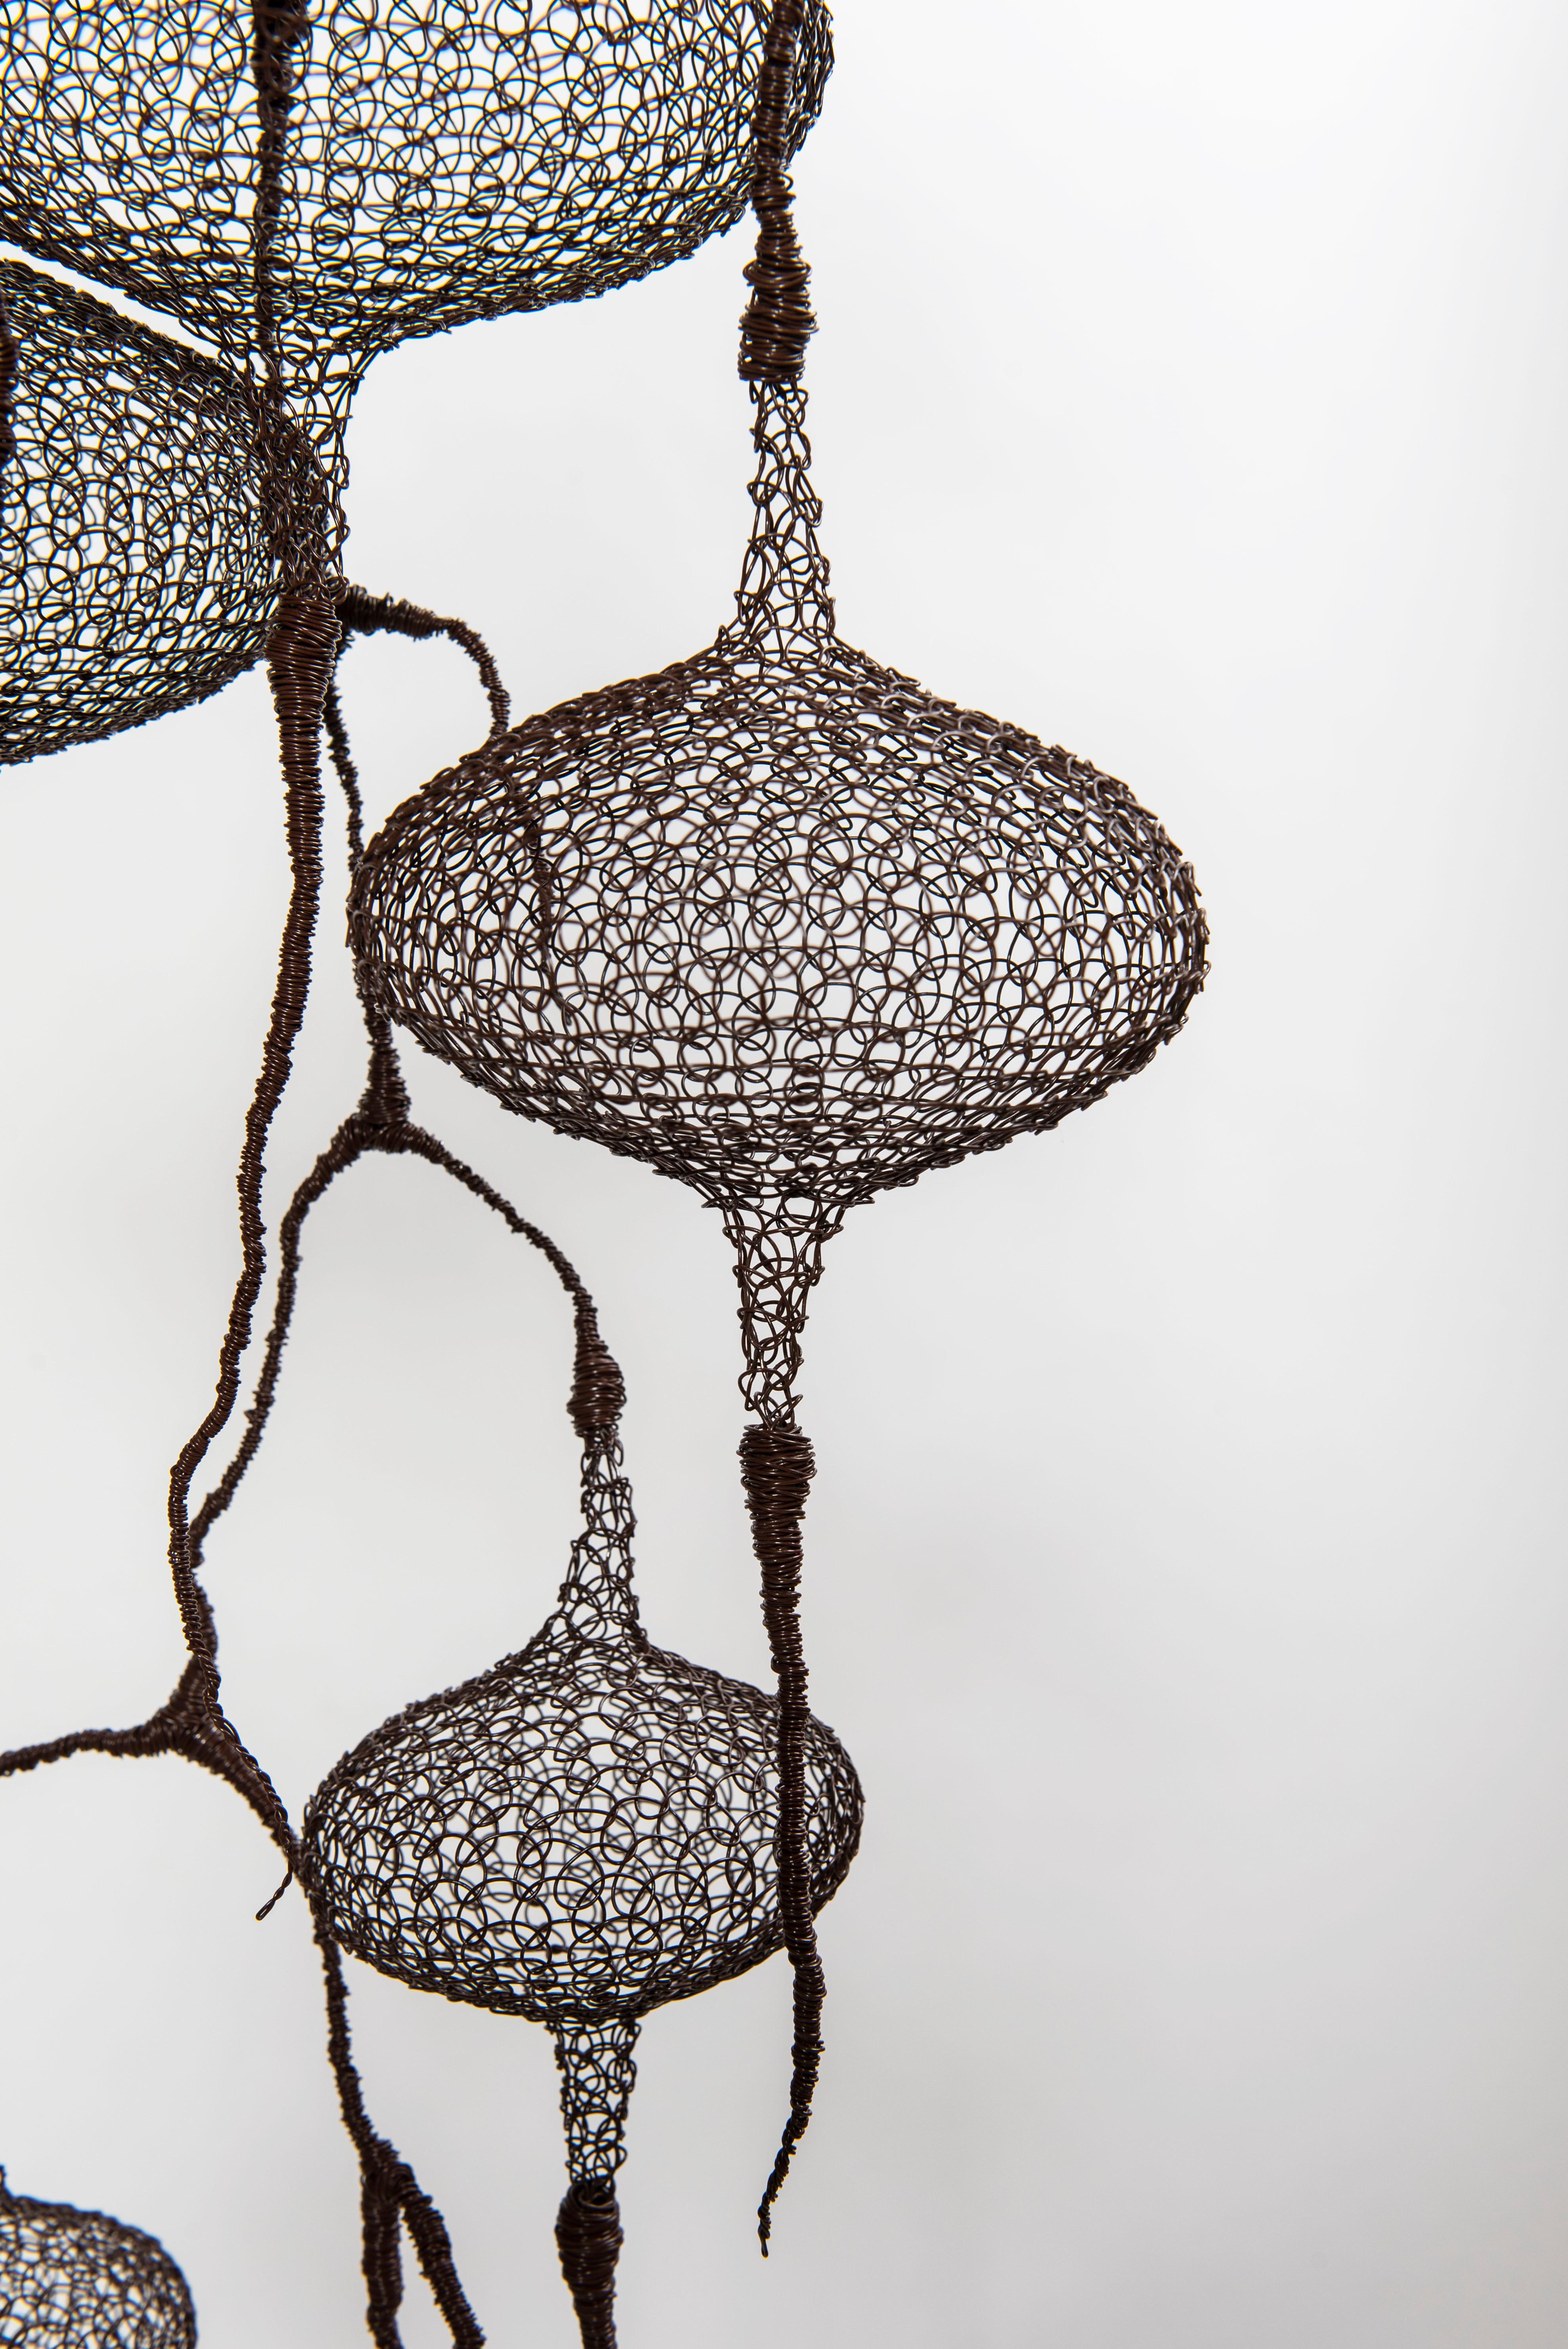 This airy sculpture created from a brown iron wire by Delphine Grandvaux depicts 10 hand-knitted round-shape volumes being linked in a way of  